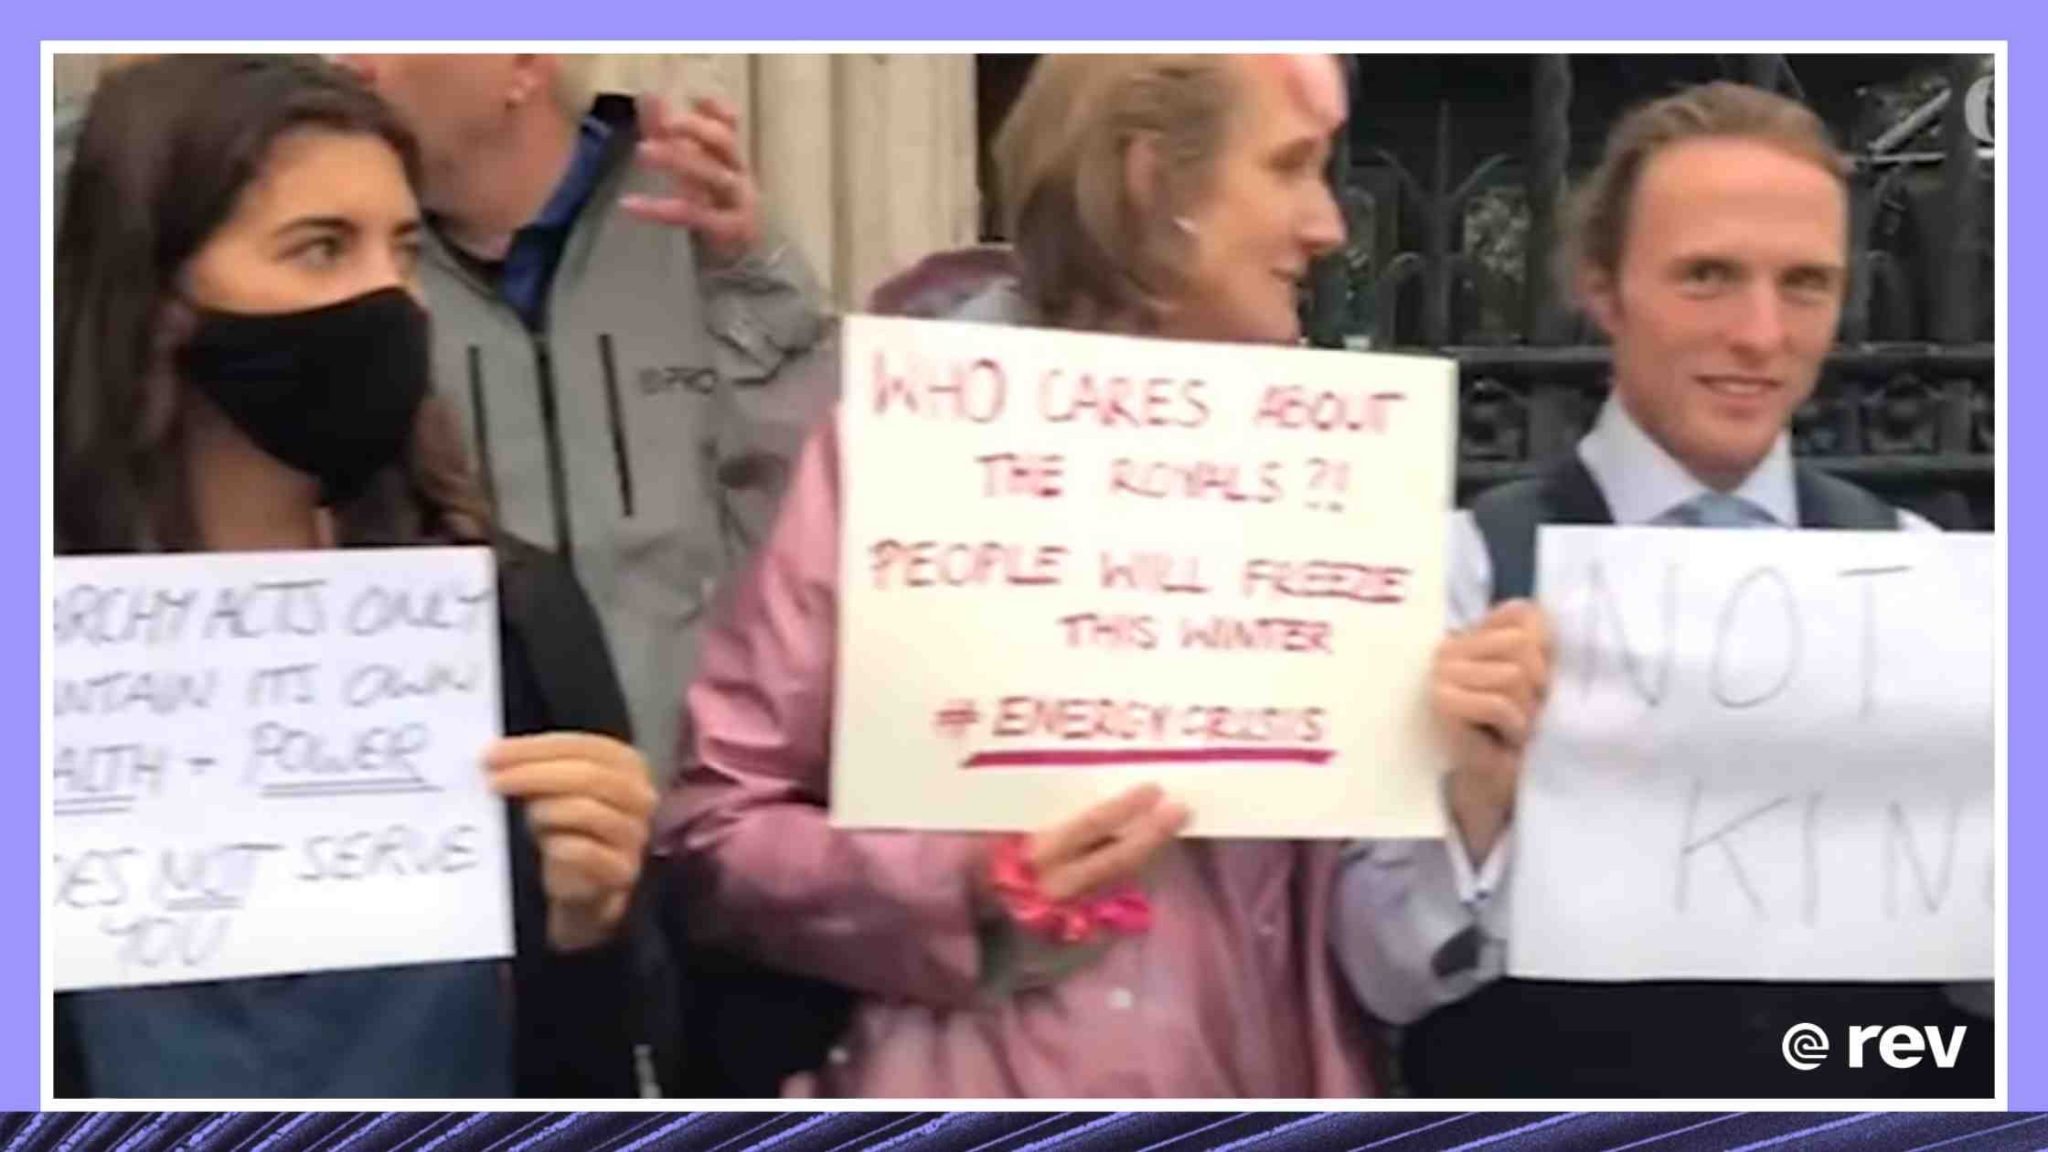 Anti-monarchy protesters hold signs in Westminster after arrests Transcript